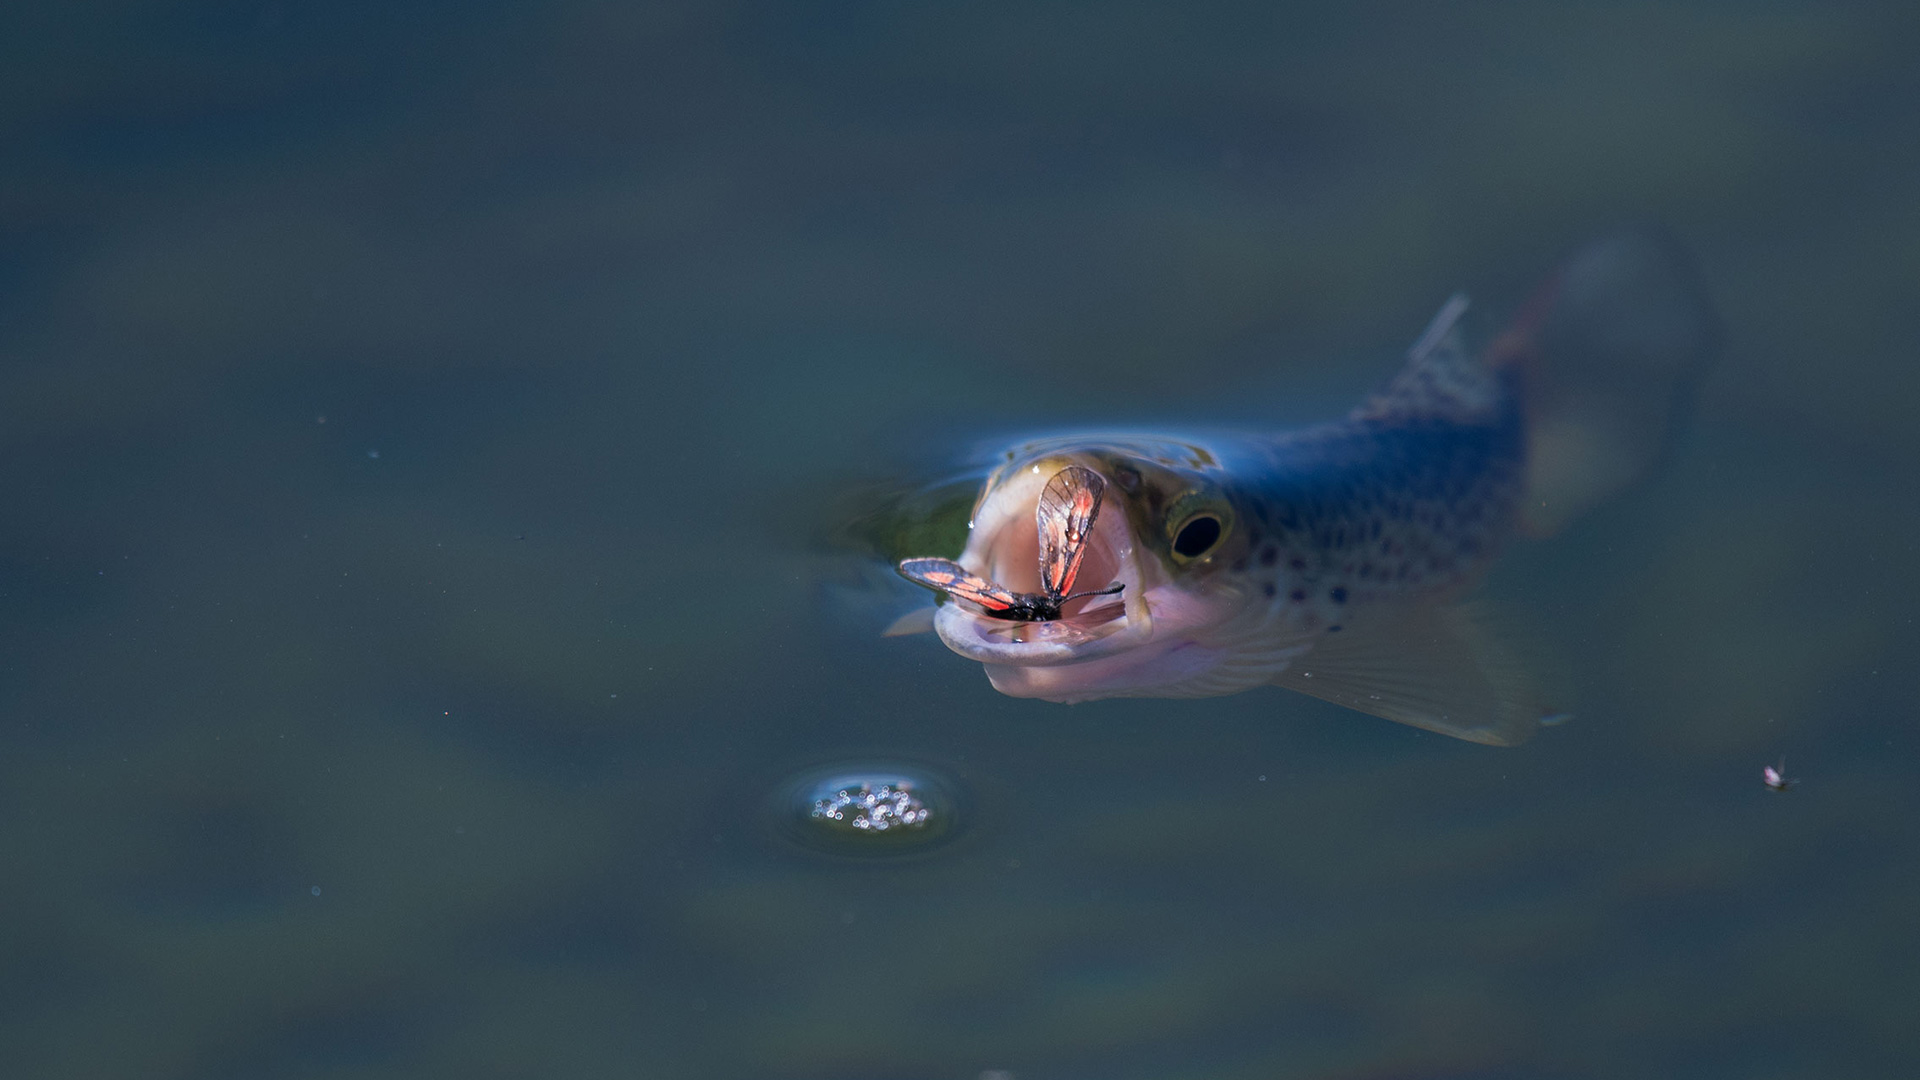 Waking trout eating insect